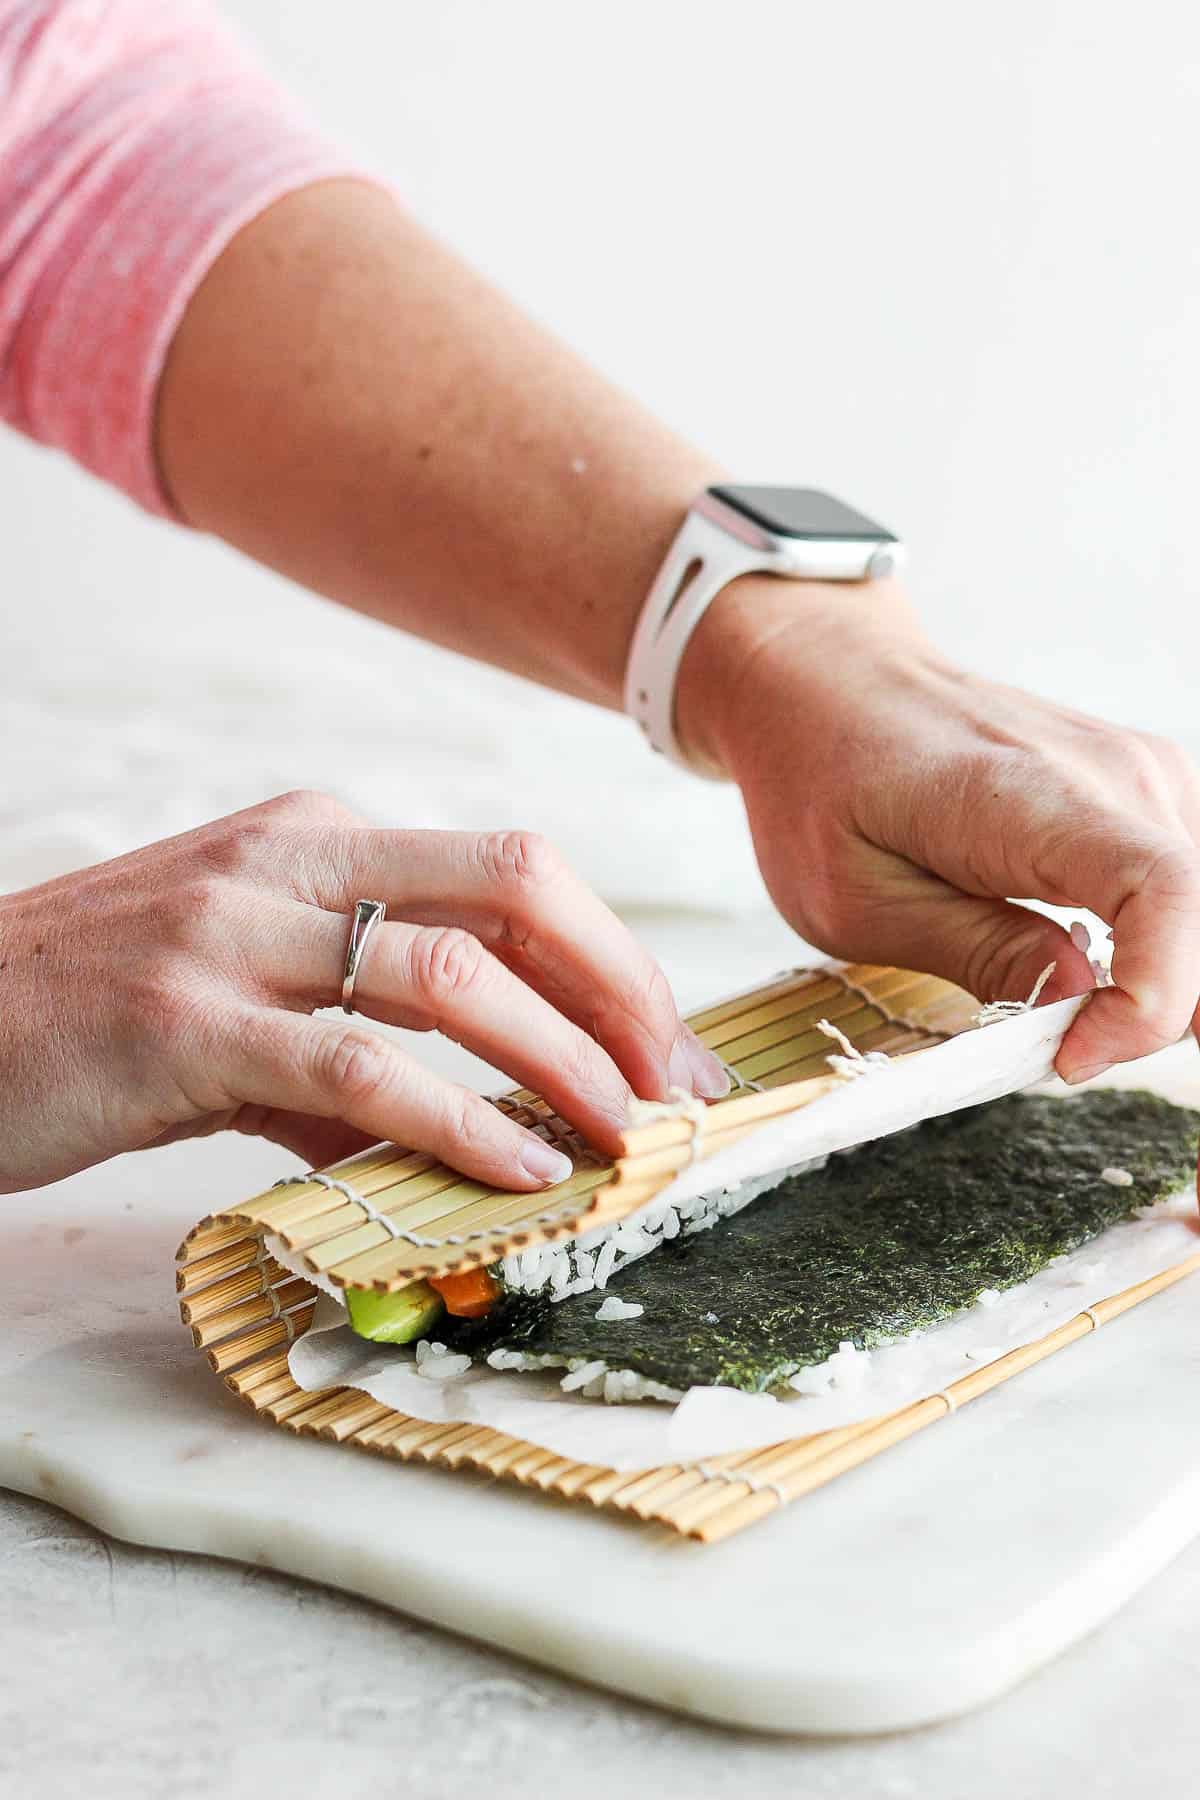 Two hands using the bamboo sheet to pull the nori sheet over the filling ingredients.